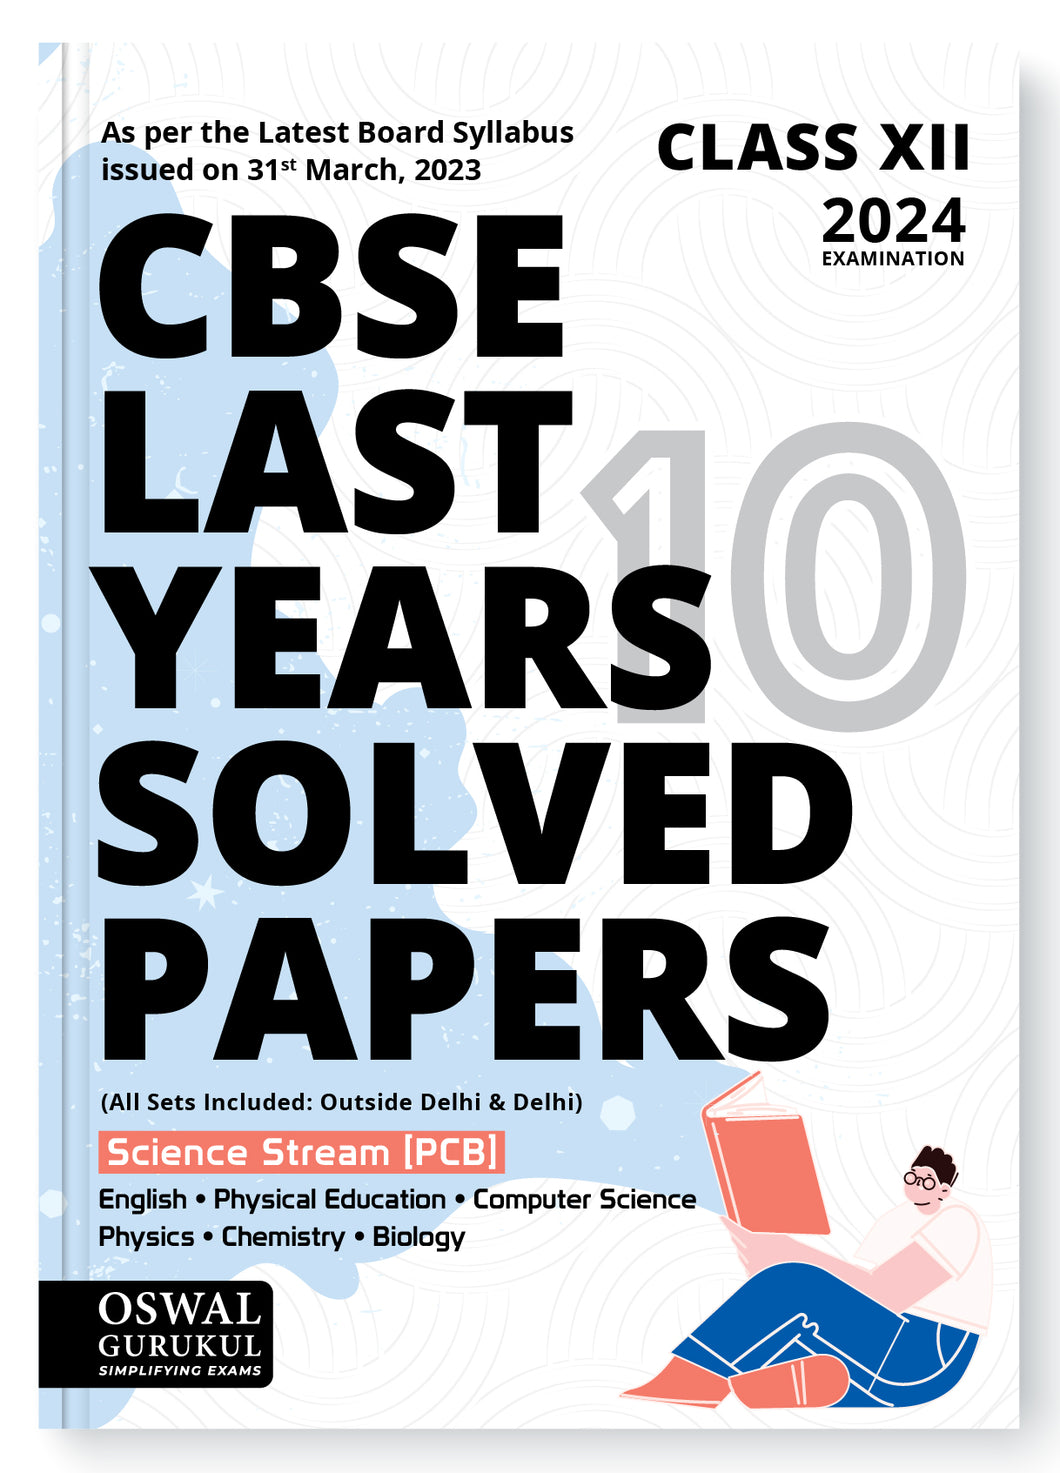 Oswal - Gurukul Last Years 10 Solved Papers - Science (PCB): CBSE Class 12 for Exam 2024